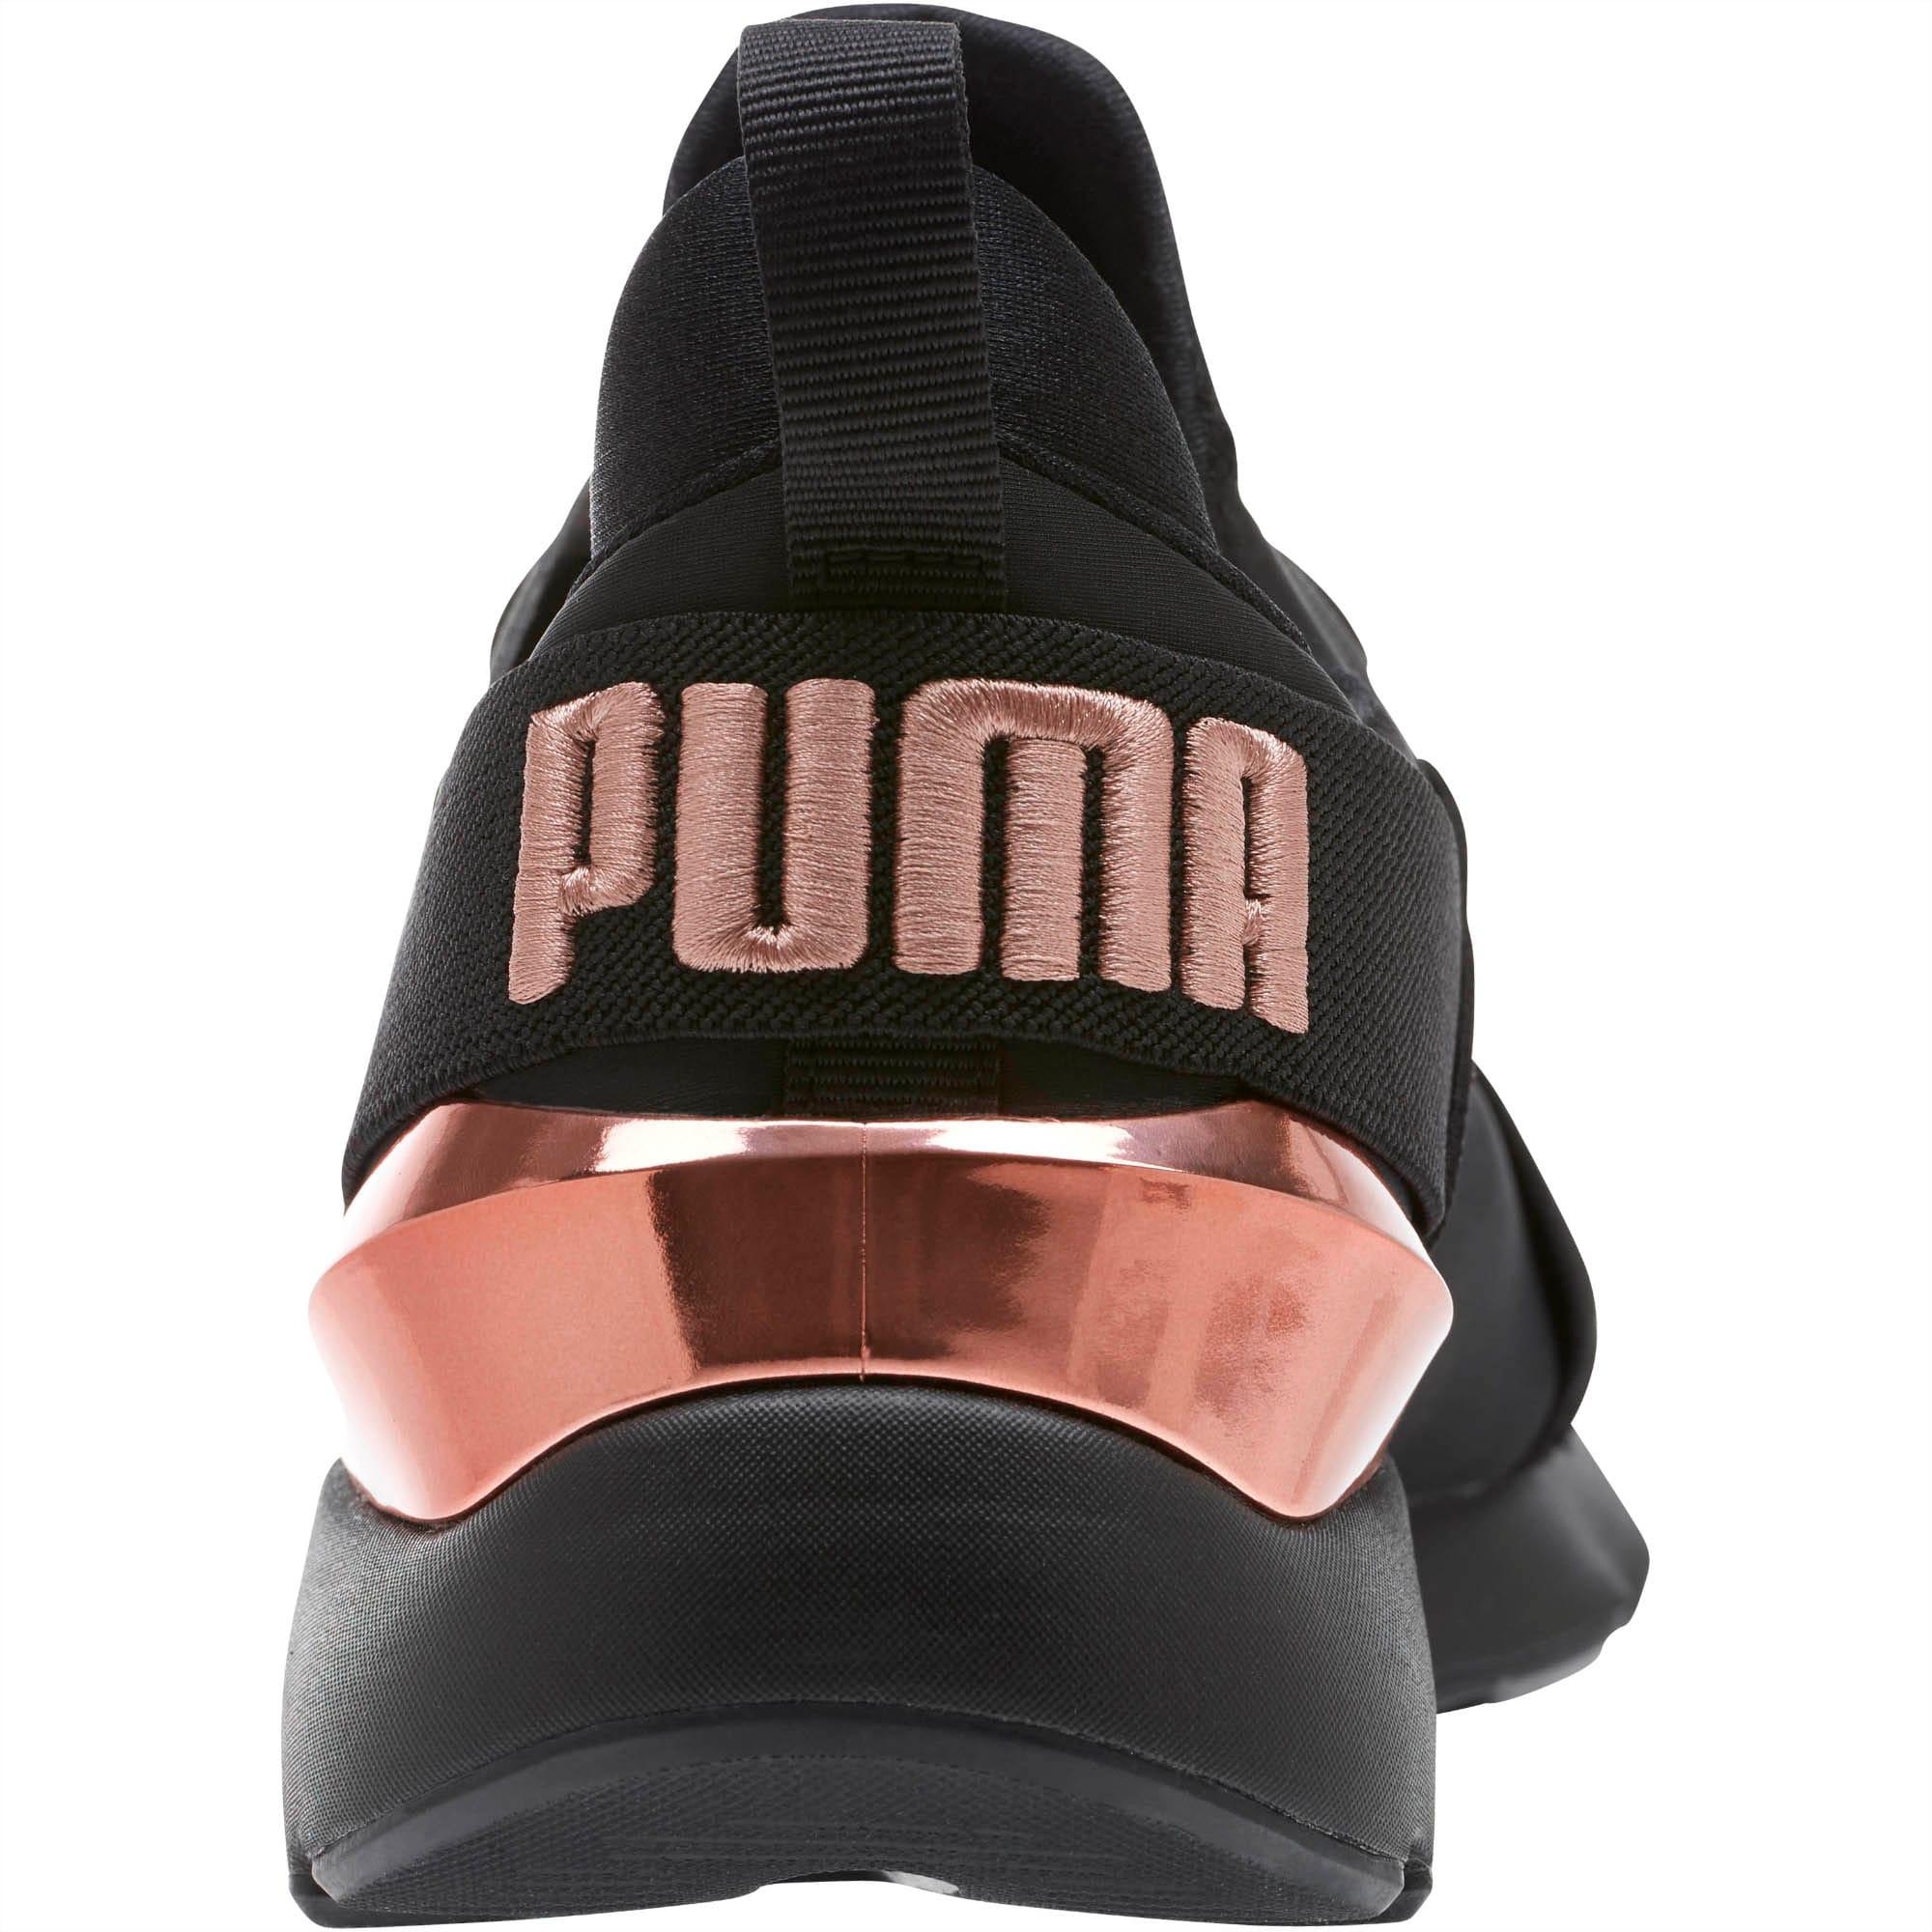 muse sneaker by puma